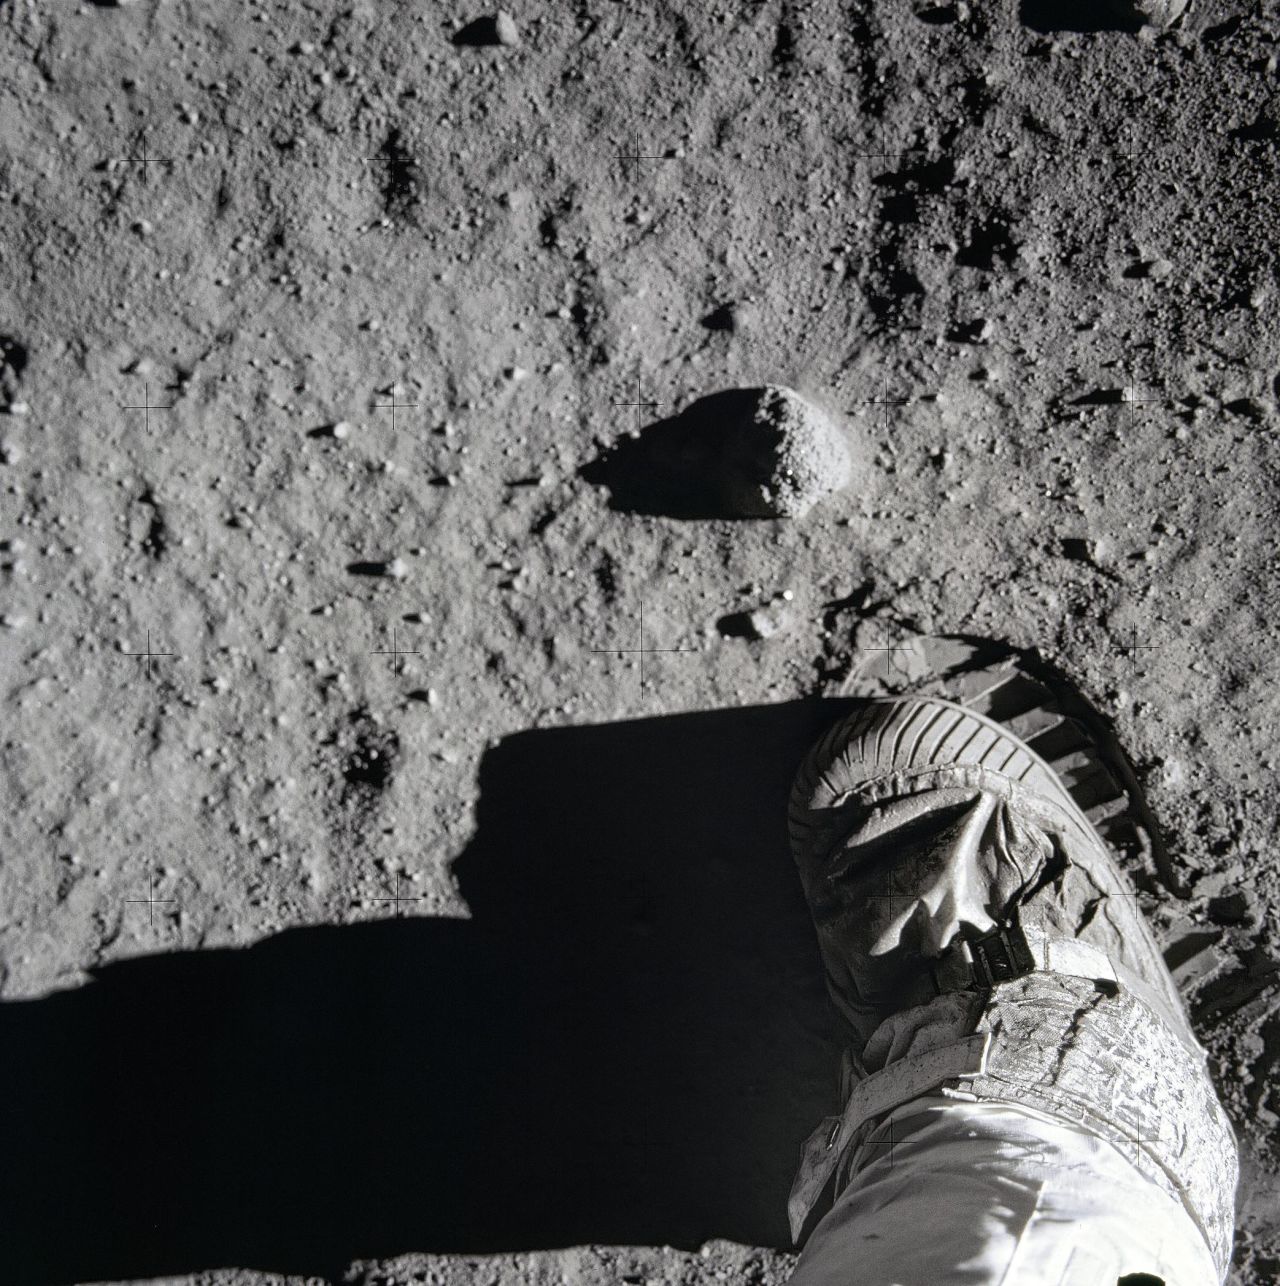 Buzz Aldrin's foot on the moon. It's likely that the footprint is still intact, because the moon has no atmosphere or rain to erode it.  